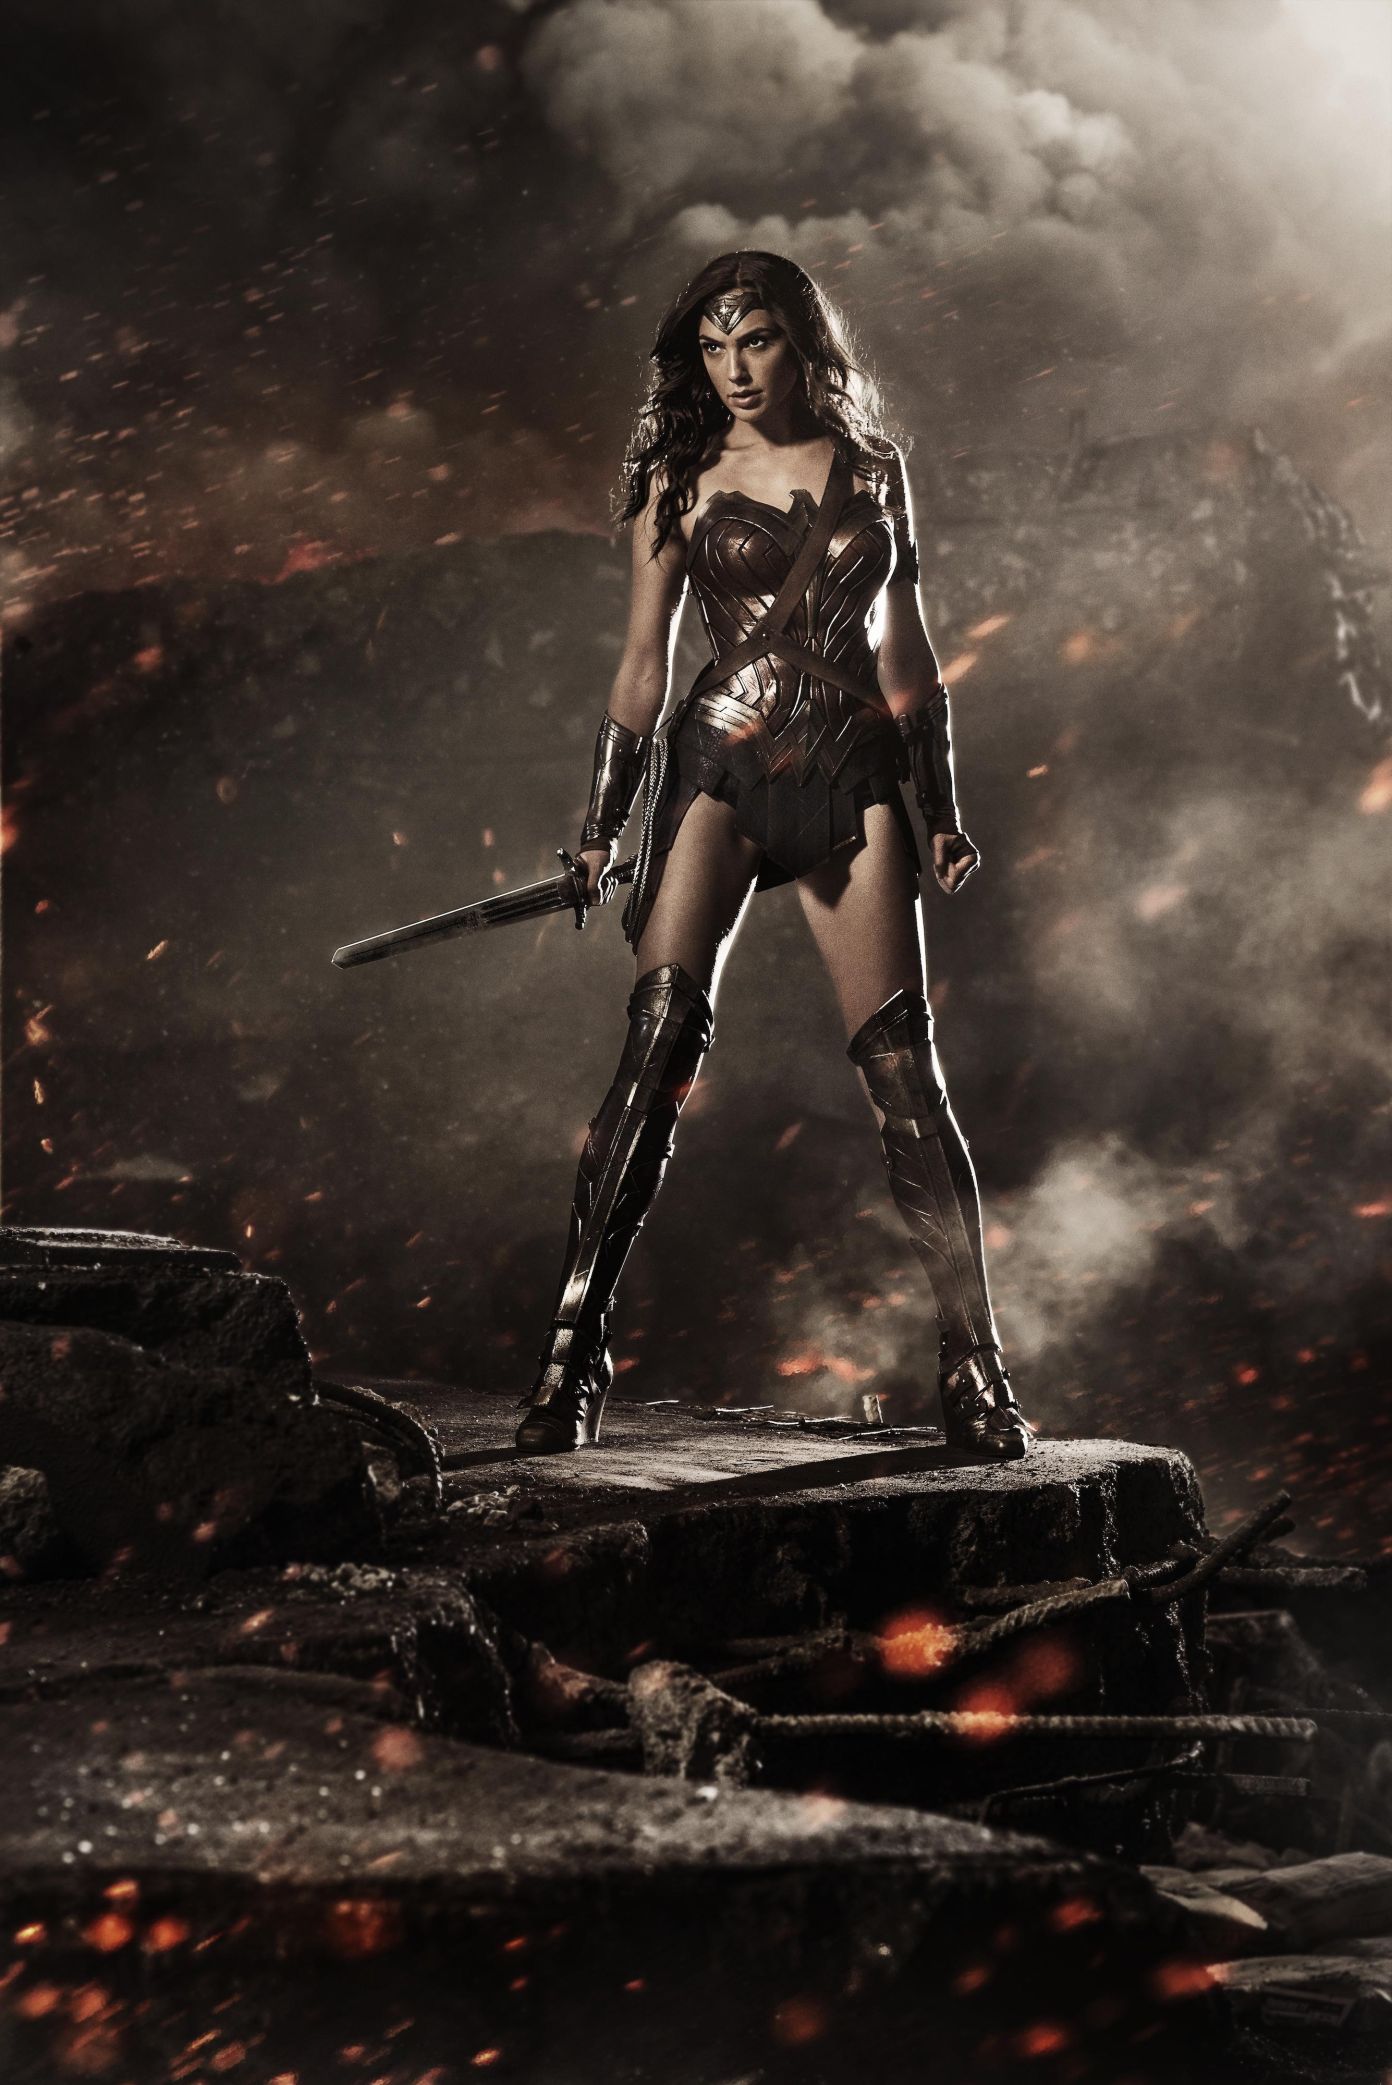 First Watch at Gal Gadot as Surprise Girl in Batman v Superman: Break of day of Justice